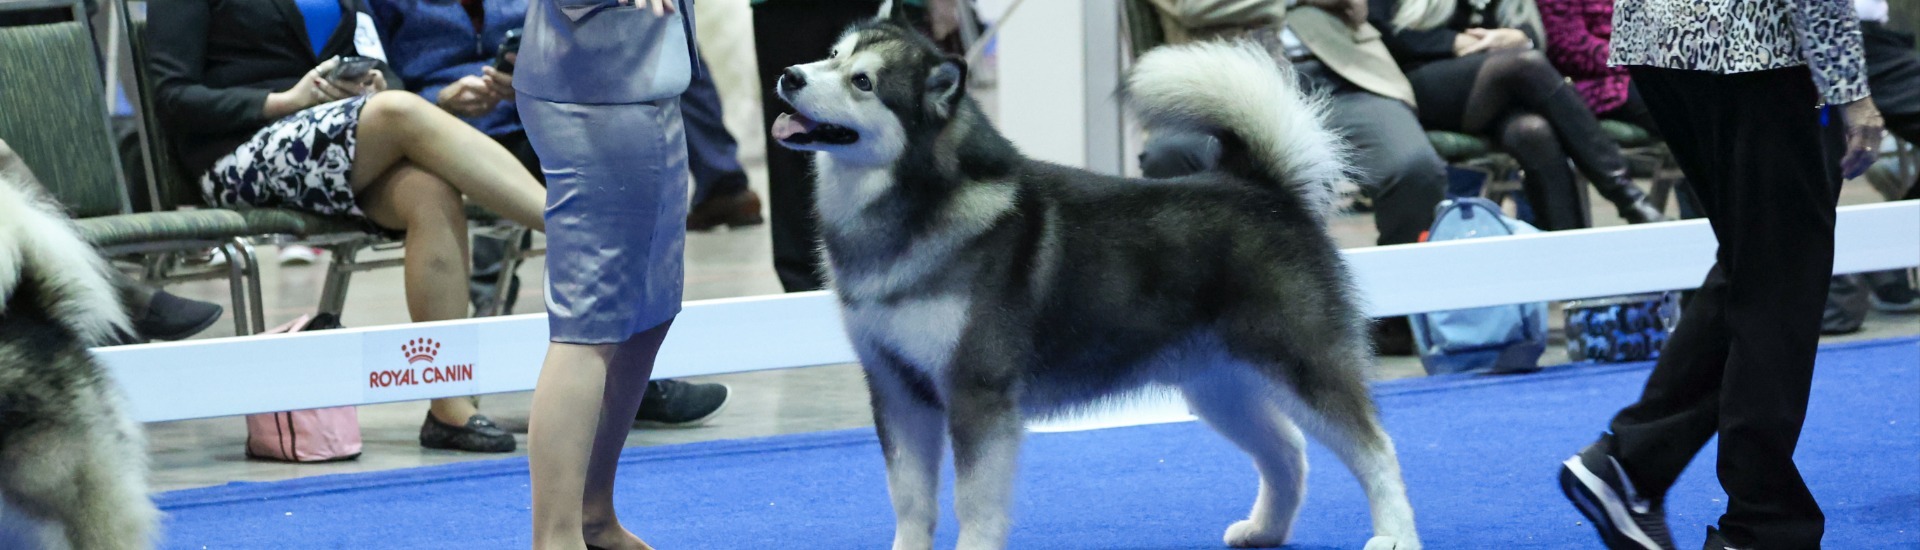 2022 AKC National Championship presented by Royal Canin AKC.tv